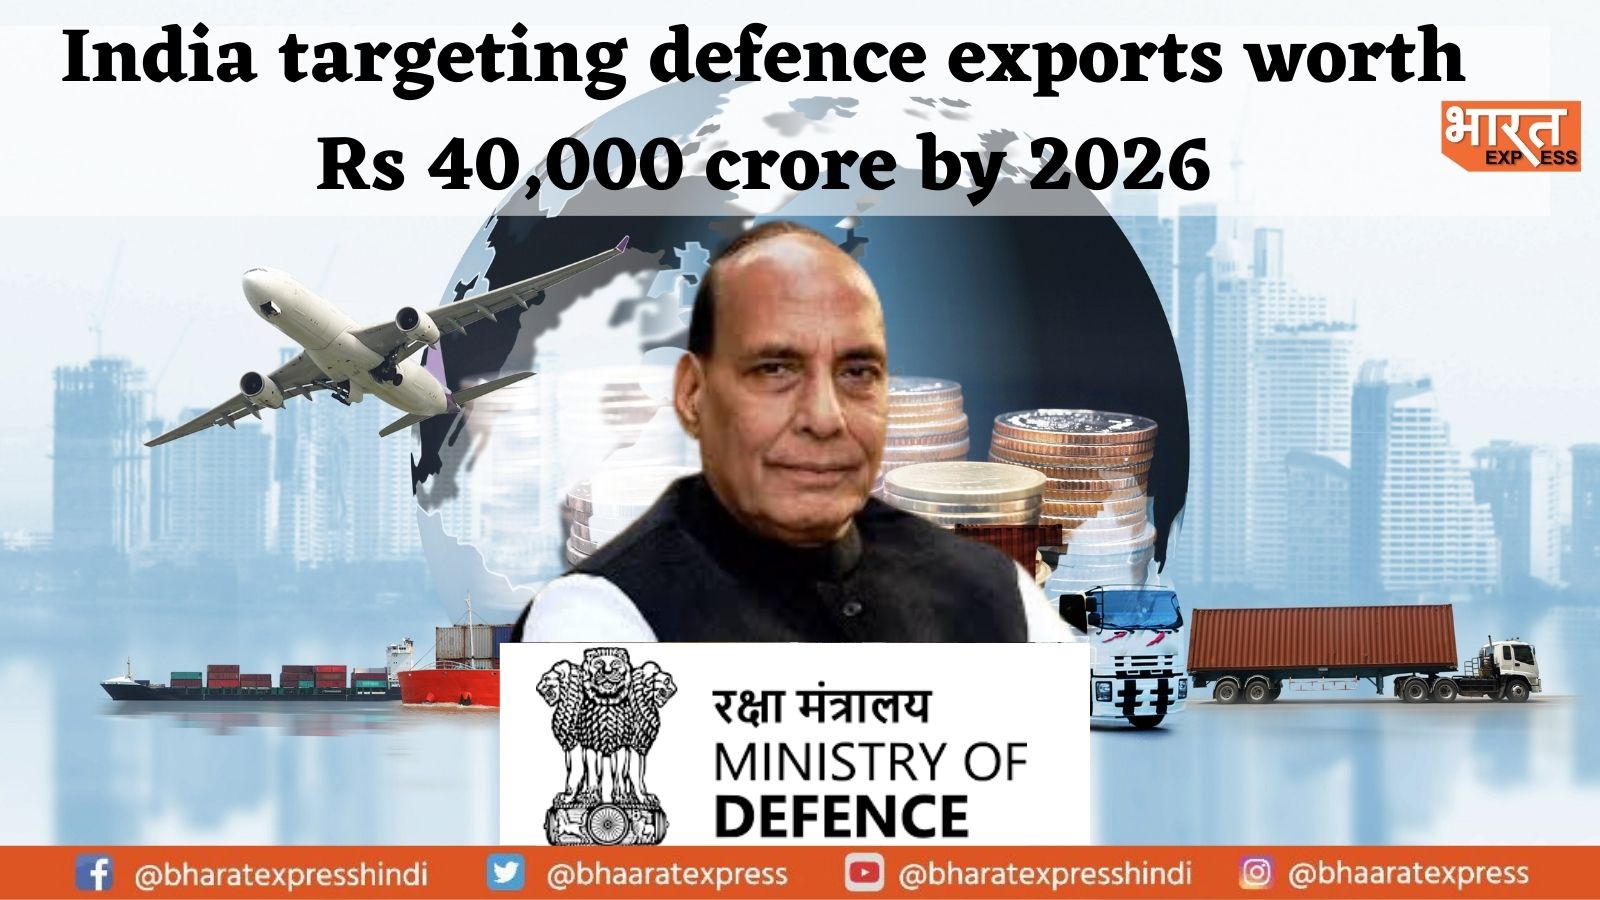 India’s Defence Equipment Exports to Reach Rs 40,000 Crore by 2026: Rajnath Singh